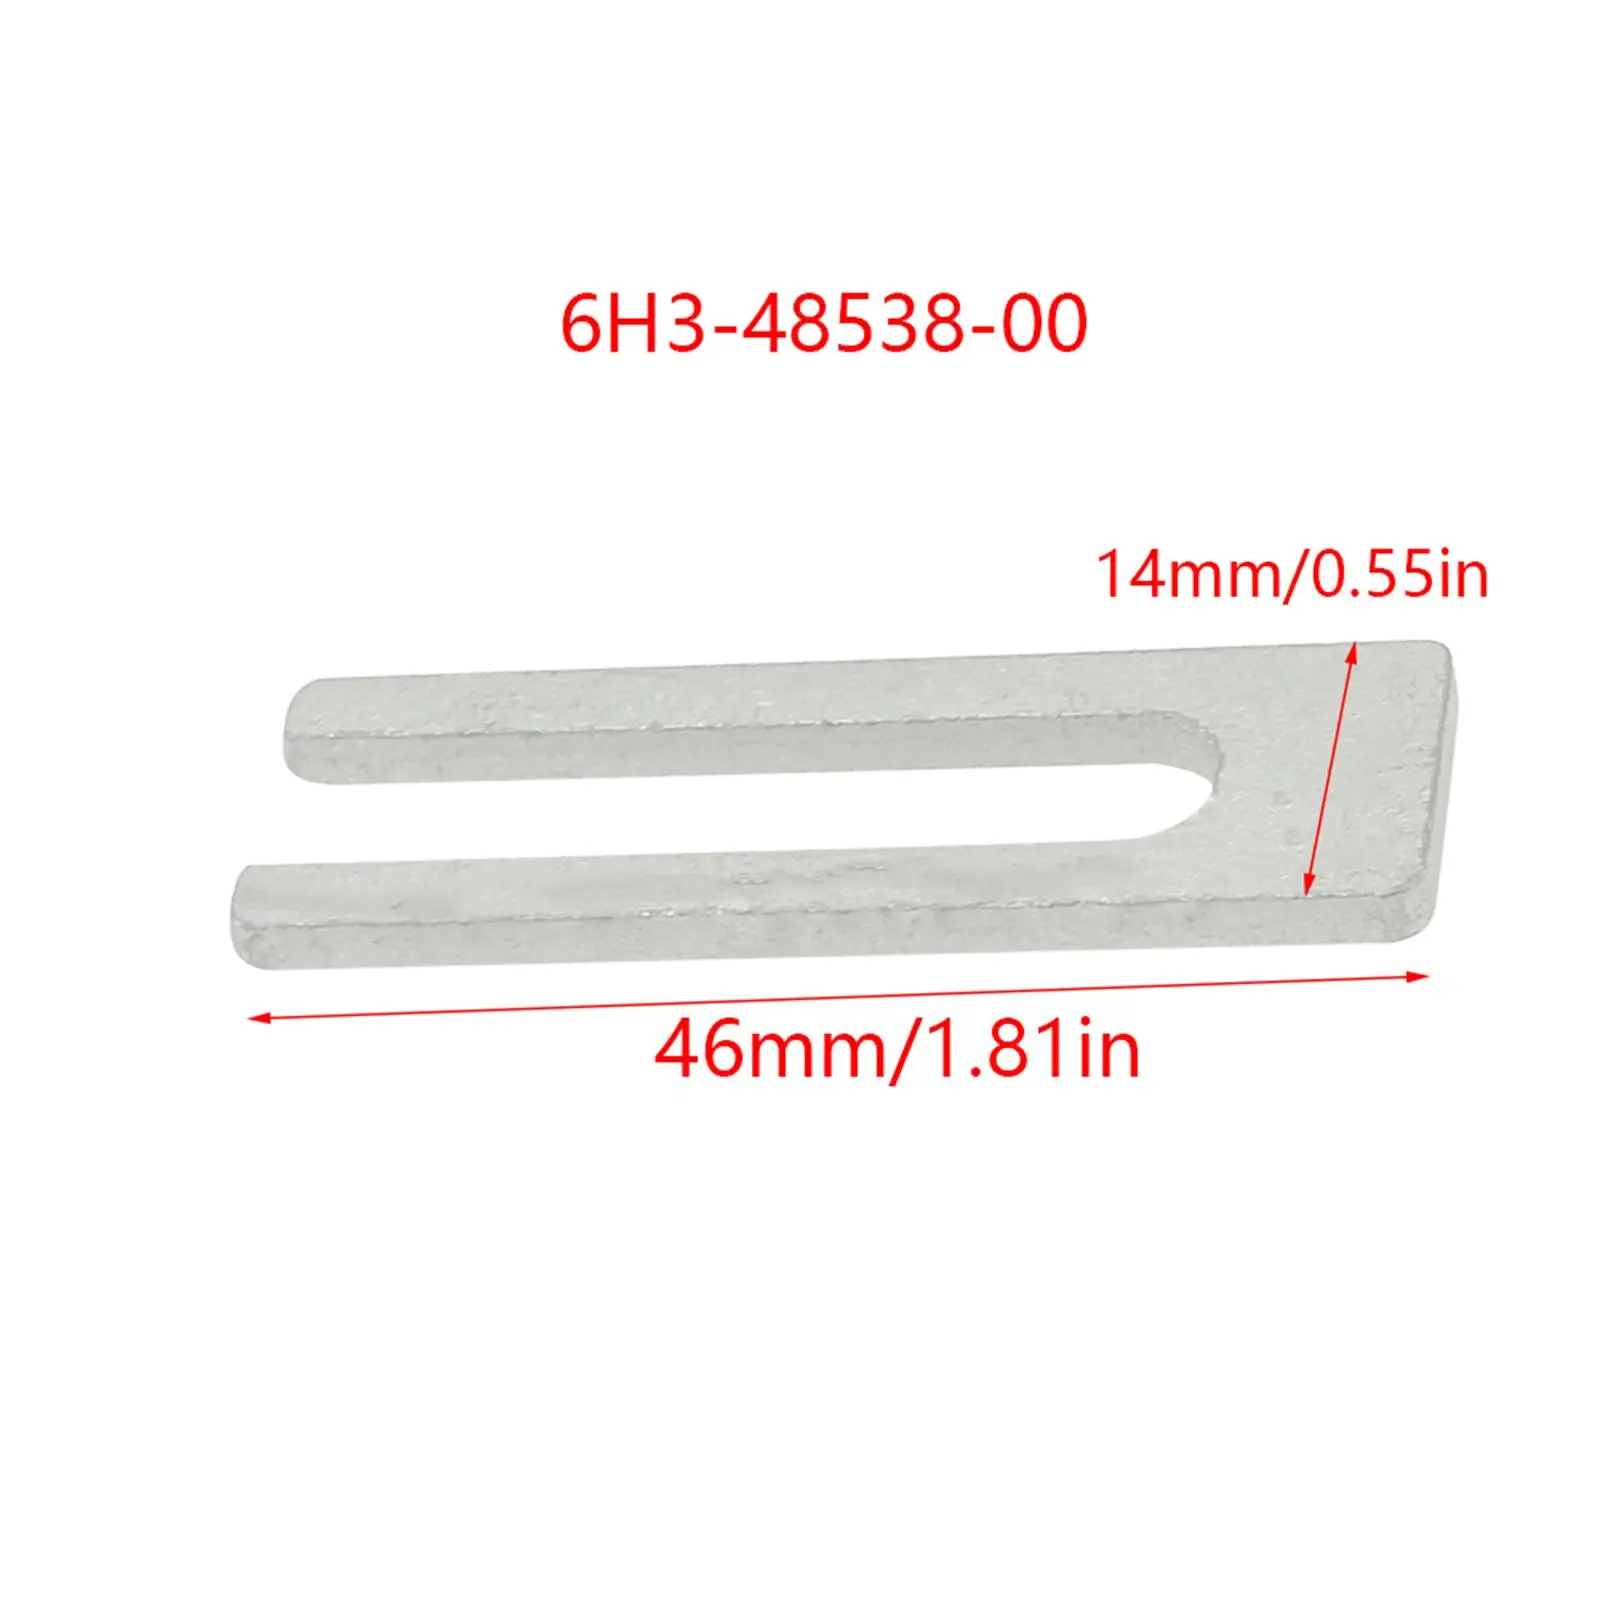 6H3-48538-00 Cable Clamp for Outboard Motor Remote Controls Spare Parts Marine Replacement Durable Professional Manufacturing